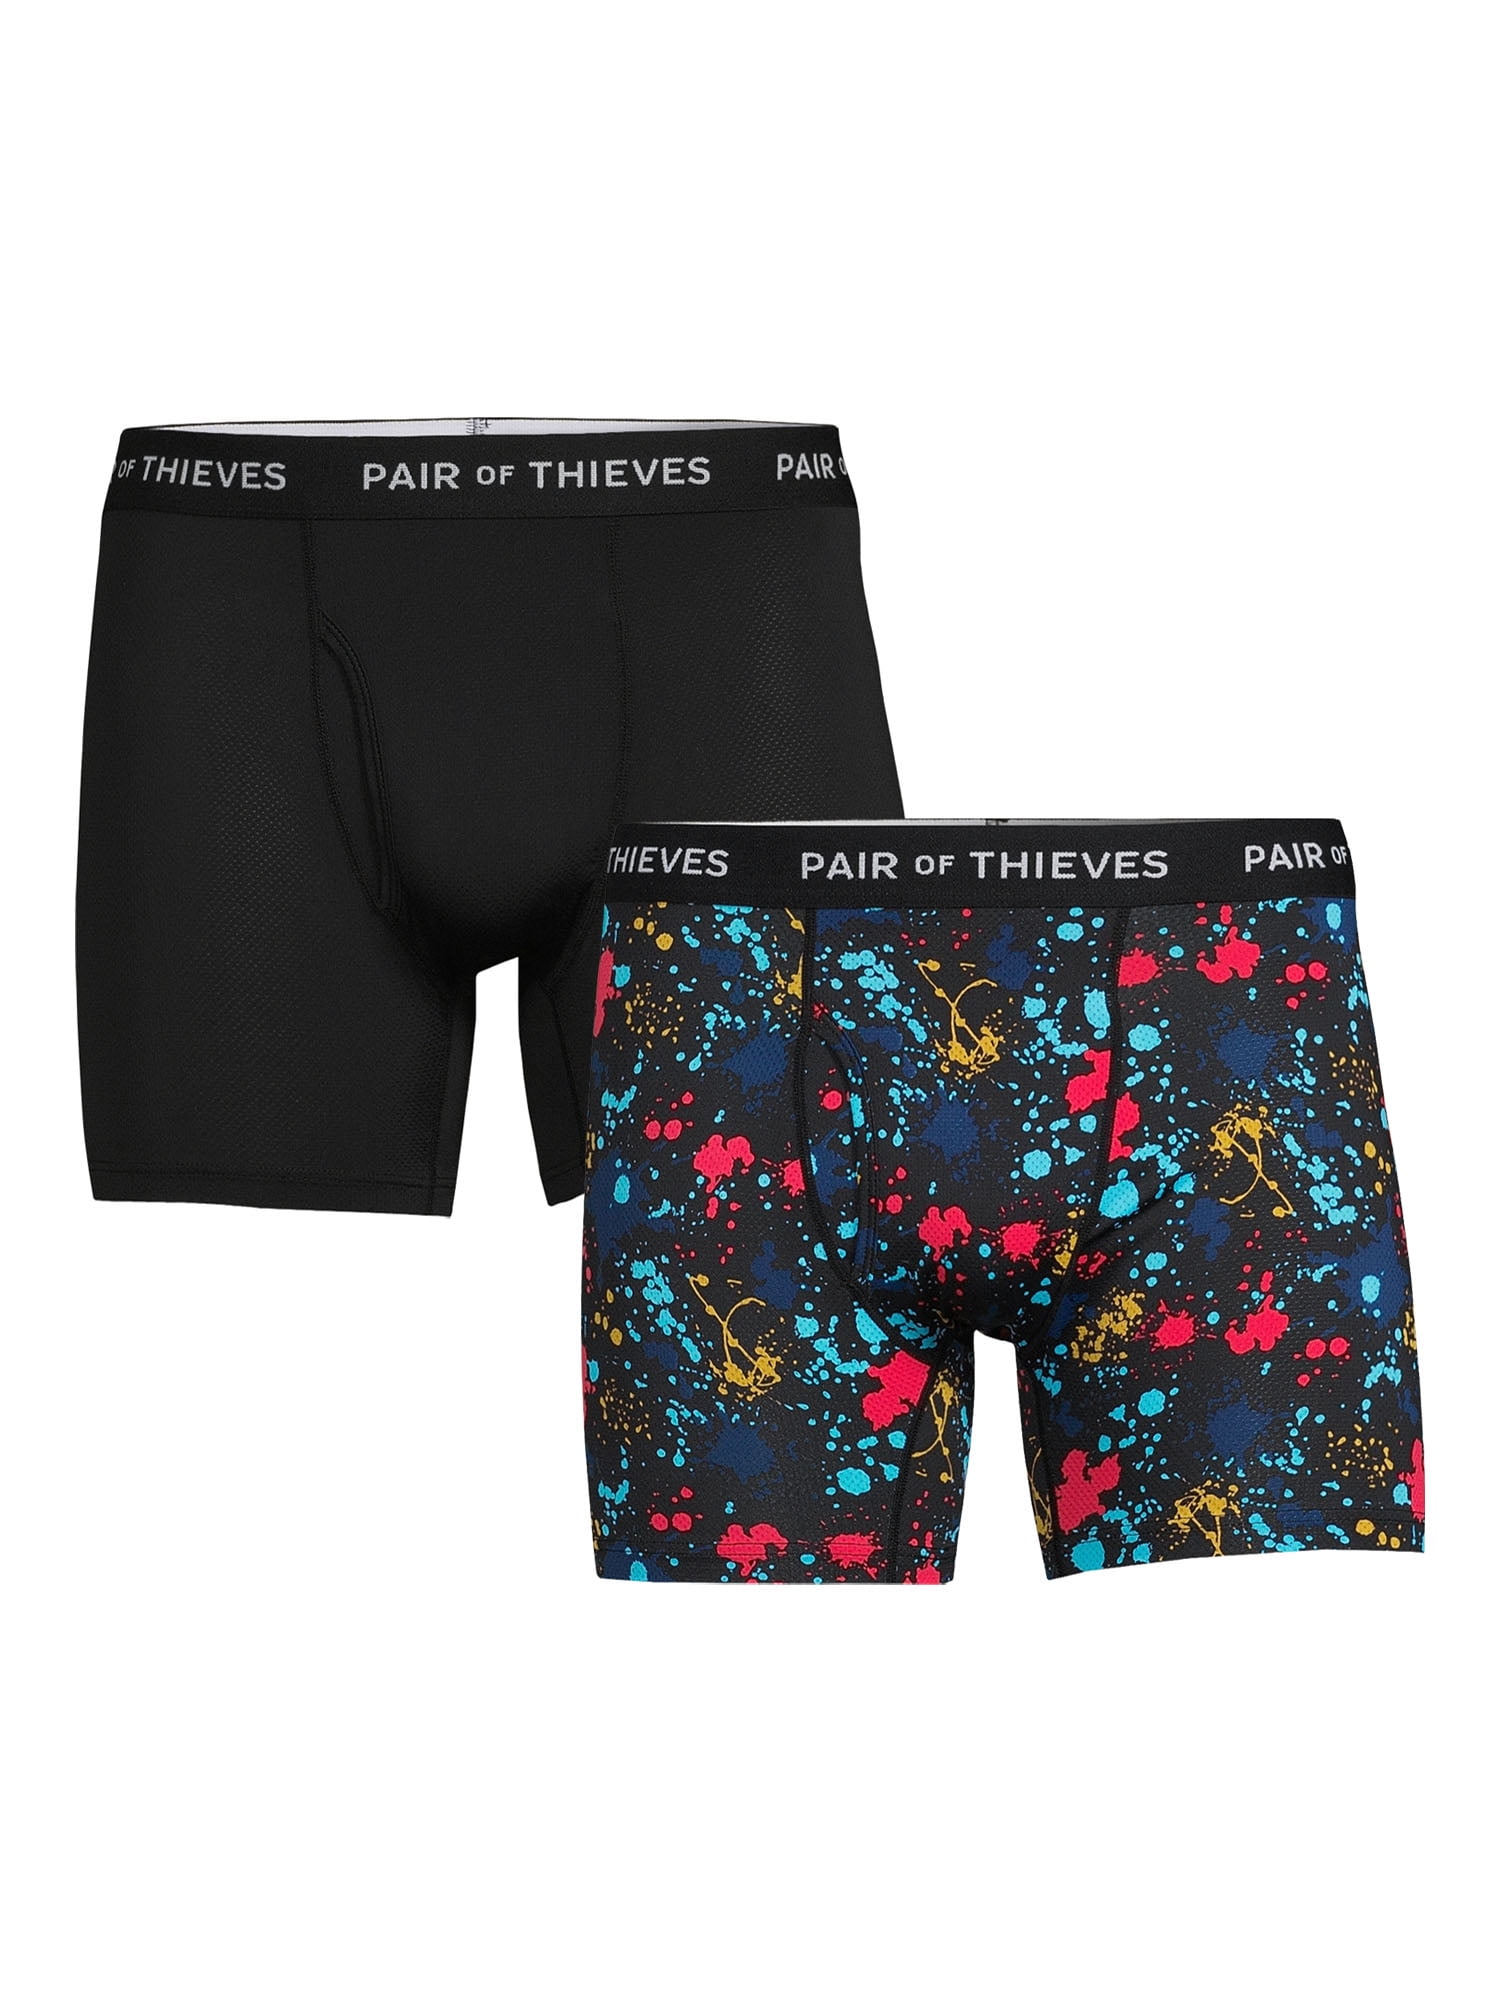 Pair of Thieves Hustle Boxer Briefs, 2-Pack, Stand Up 